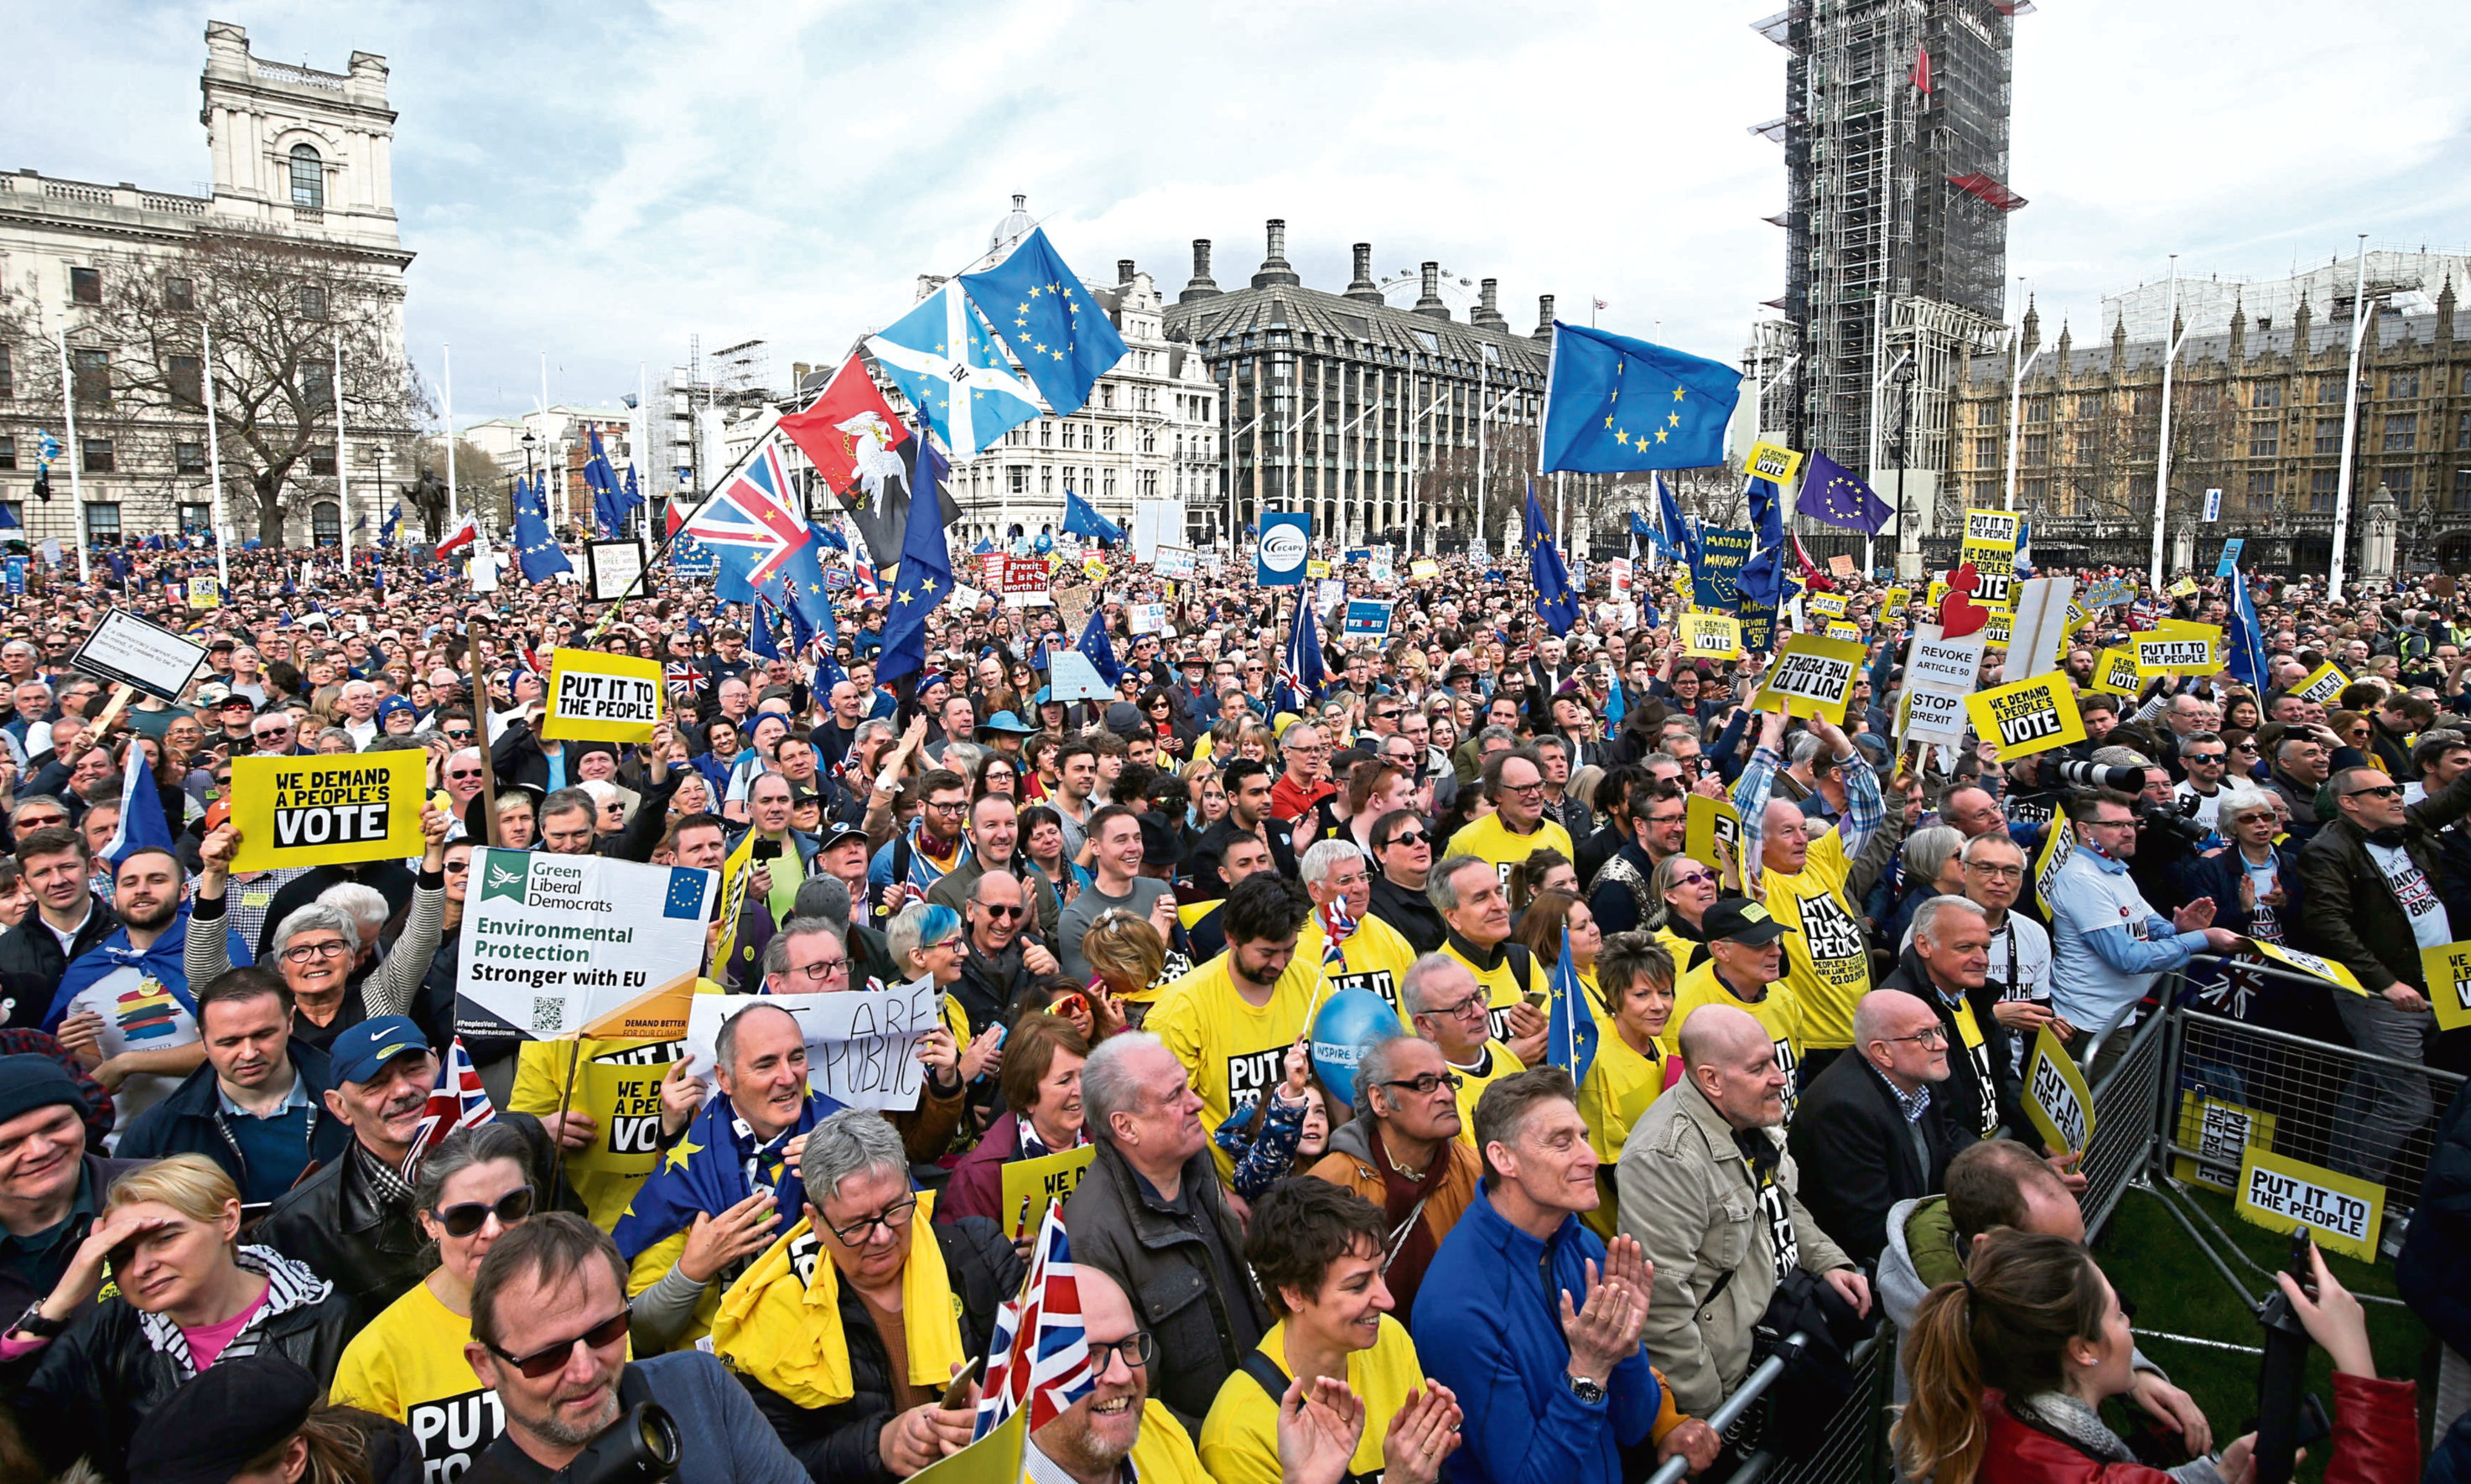 Anti-Brexit campaigners gather in Parliament Square, as they take part in the People's Vote March in London.